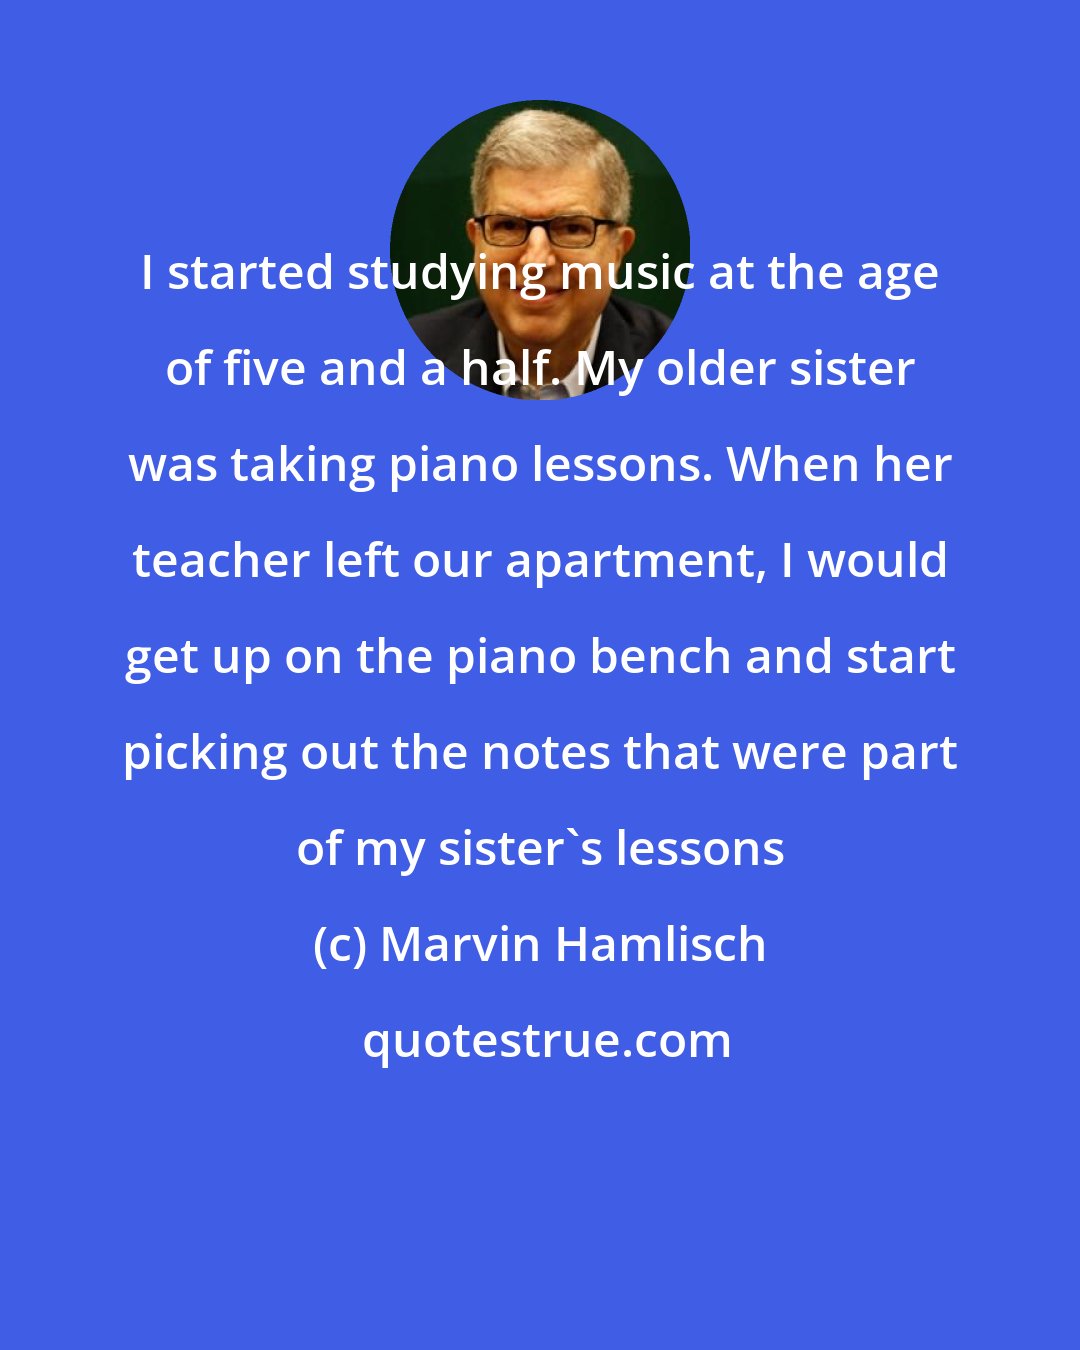 Marvin Hamlisch: I started studying music at the age of five and a half. My older sister was taking piano lessons. When her teacher left our apartment, I would get up on the piano bench and start picking out the notes that were part of my sister's lessons